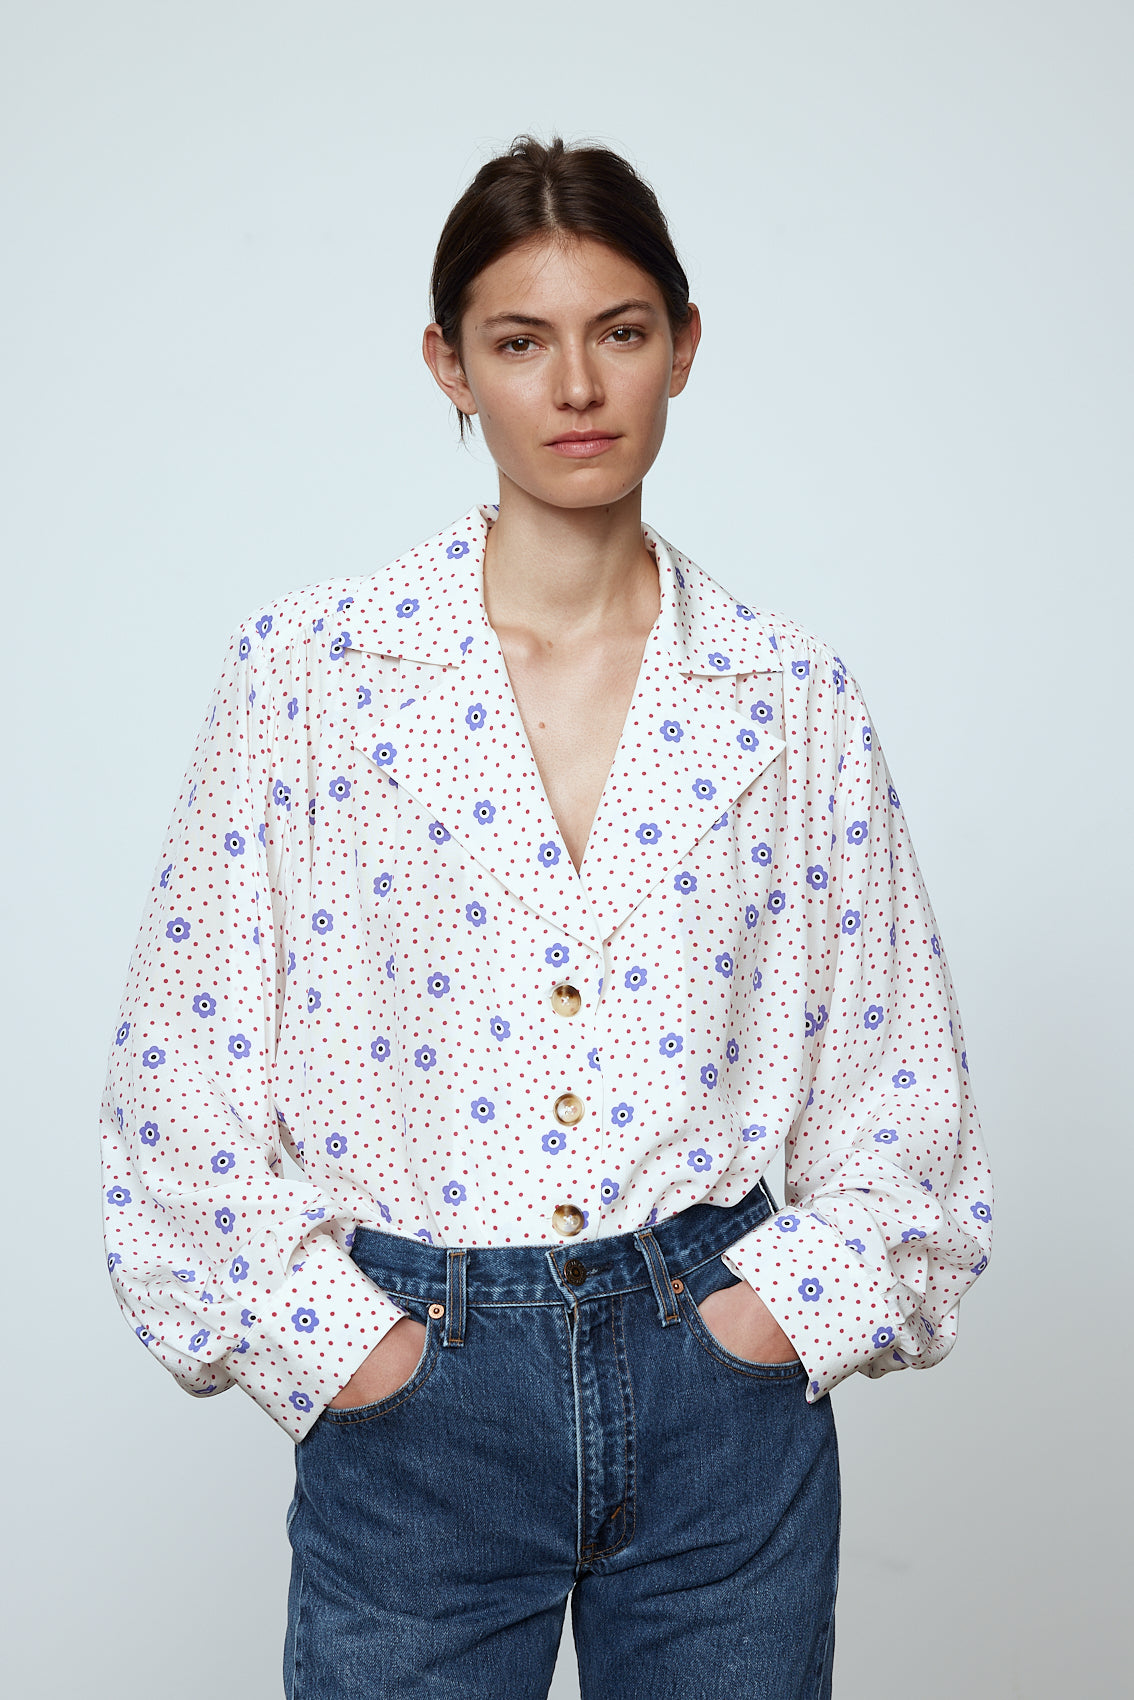 The Bonsai Shirt is made in soft silk fabric featuring our White Daisy print. The Shirt has long draped sleeves, a deep-cut oversized shirt collar, and buttons on the front.   Style it with jeans and a colorful belt, together with a vest or denim jacket.   Material: 100% mulberry silk.  The model is 179cm (5'10") and wears size S.